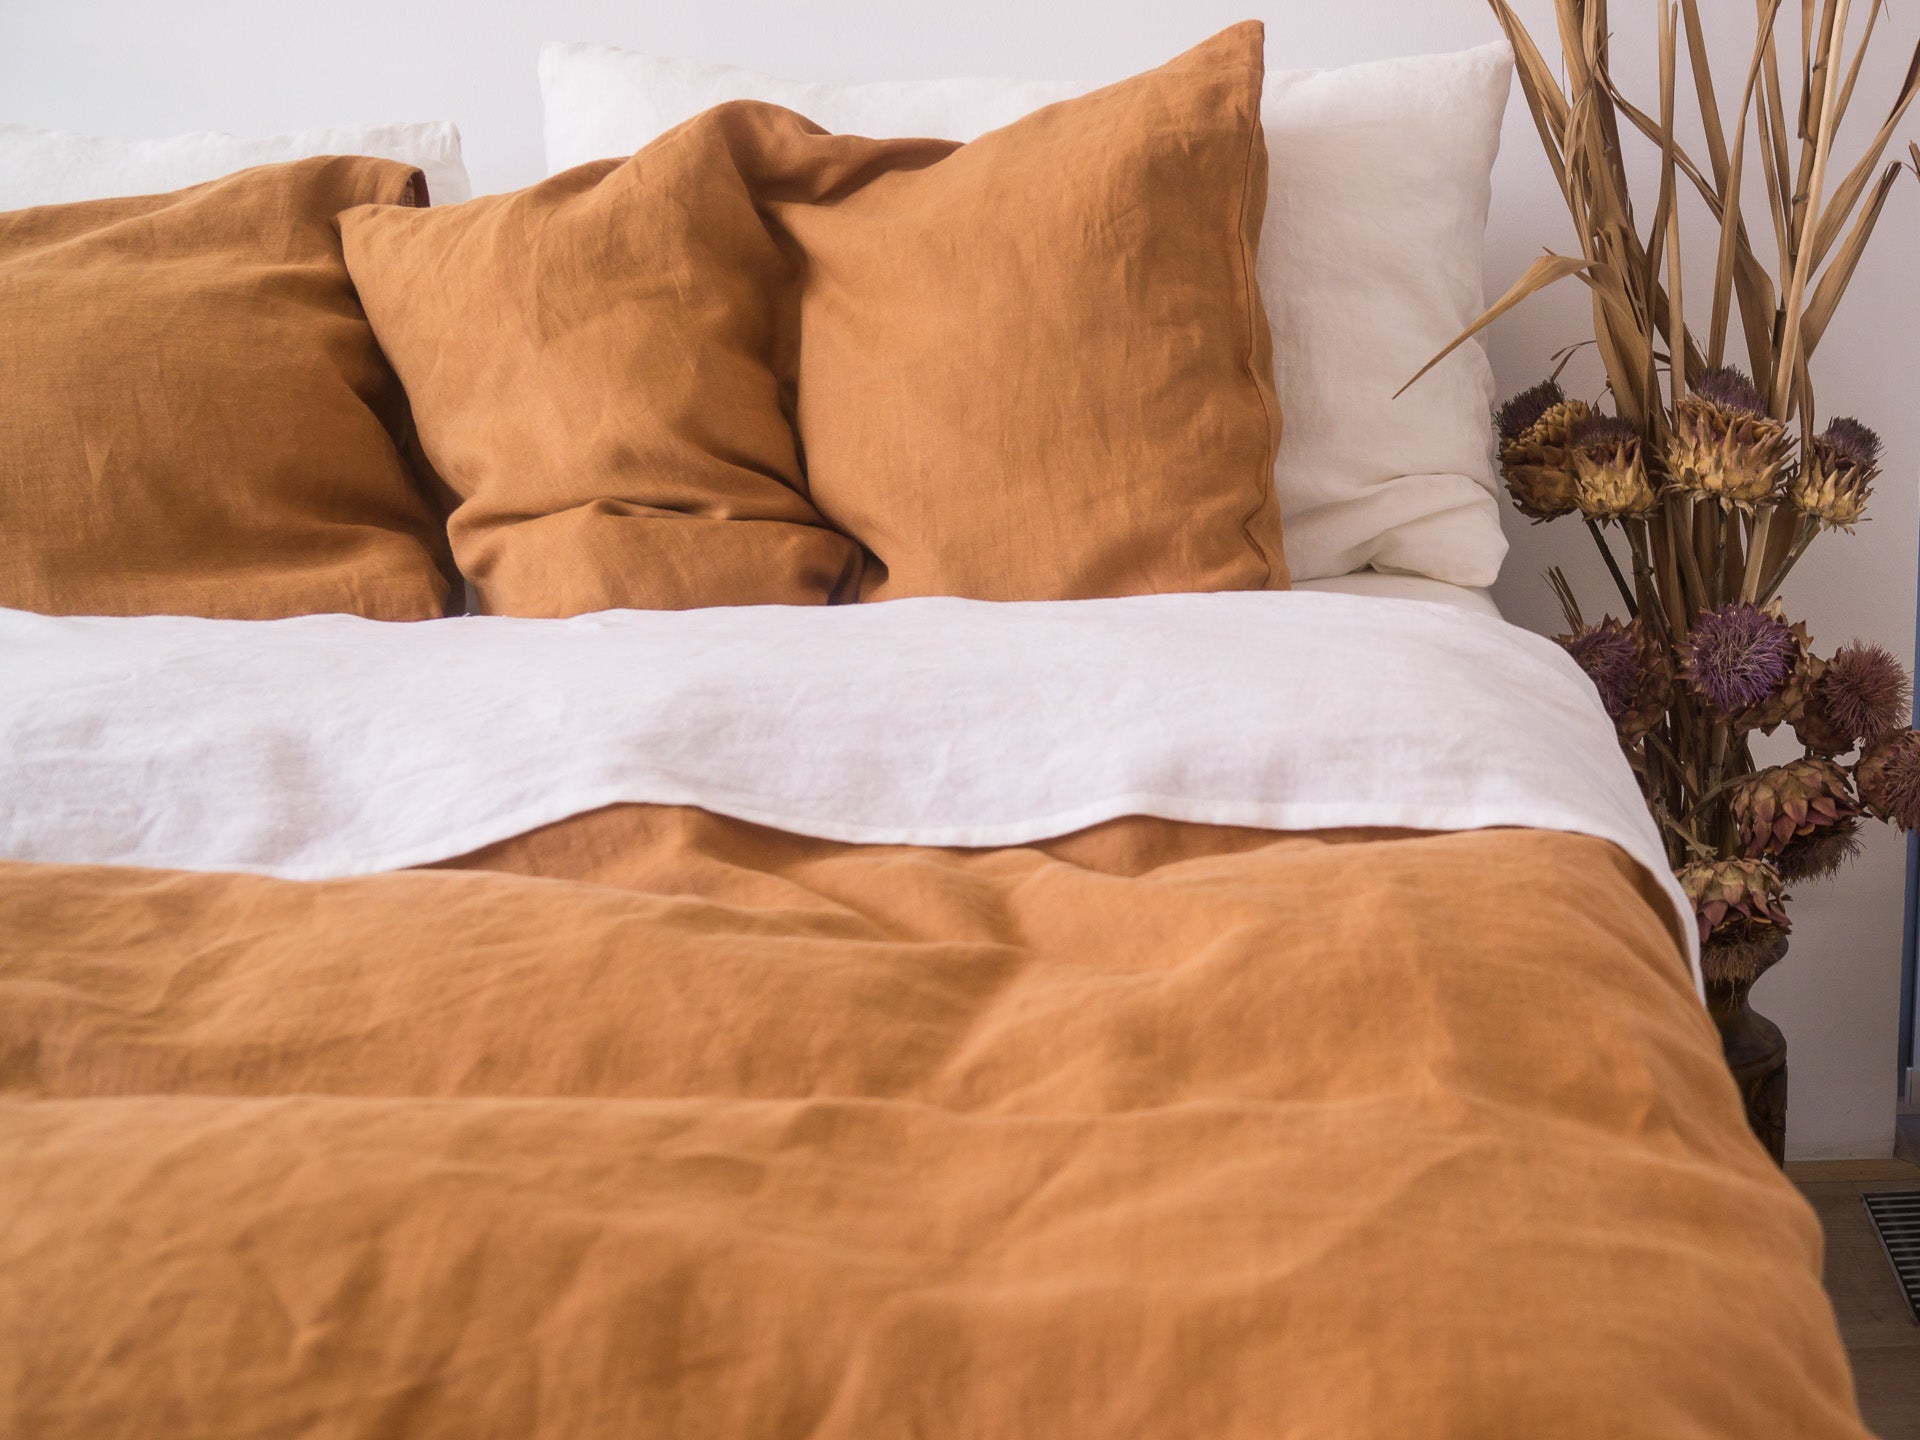 Terracotta and Off White linen bedding - Flat Sheet, Pillowcases and Duvet cover by Lagodie Home